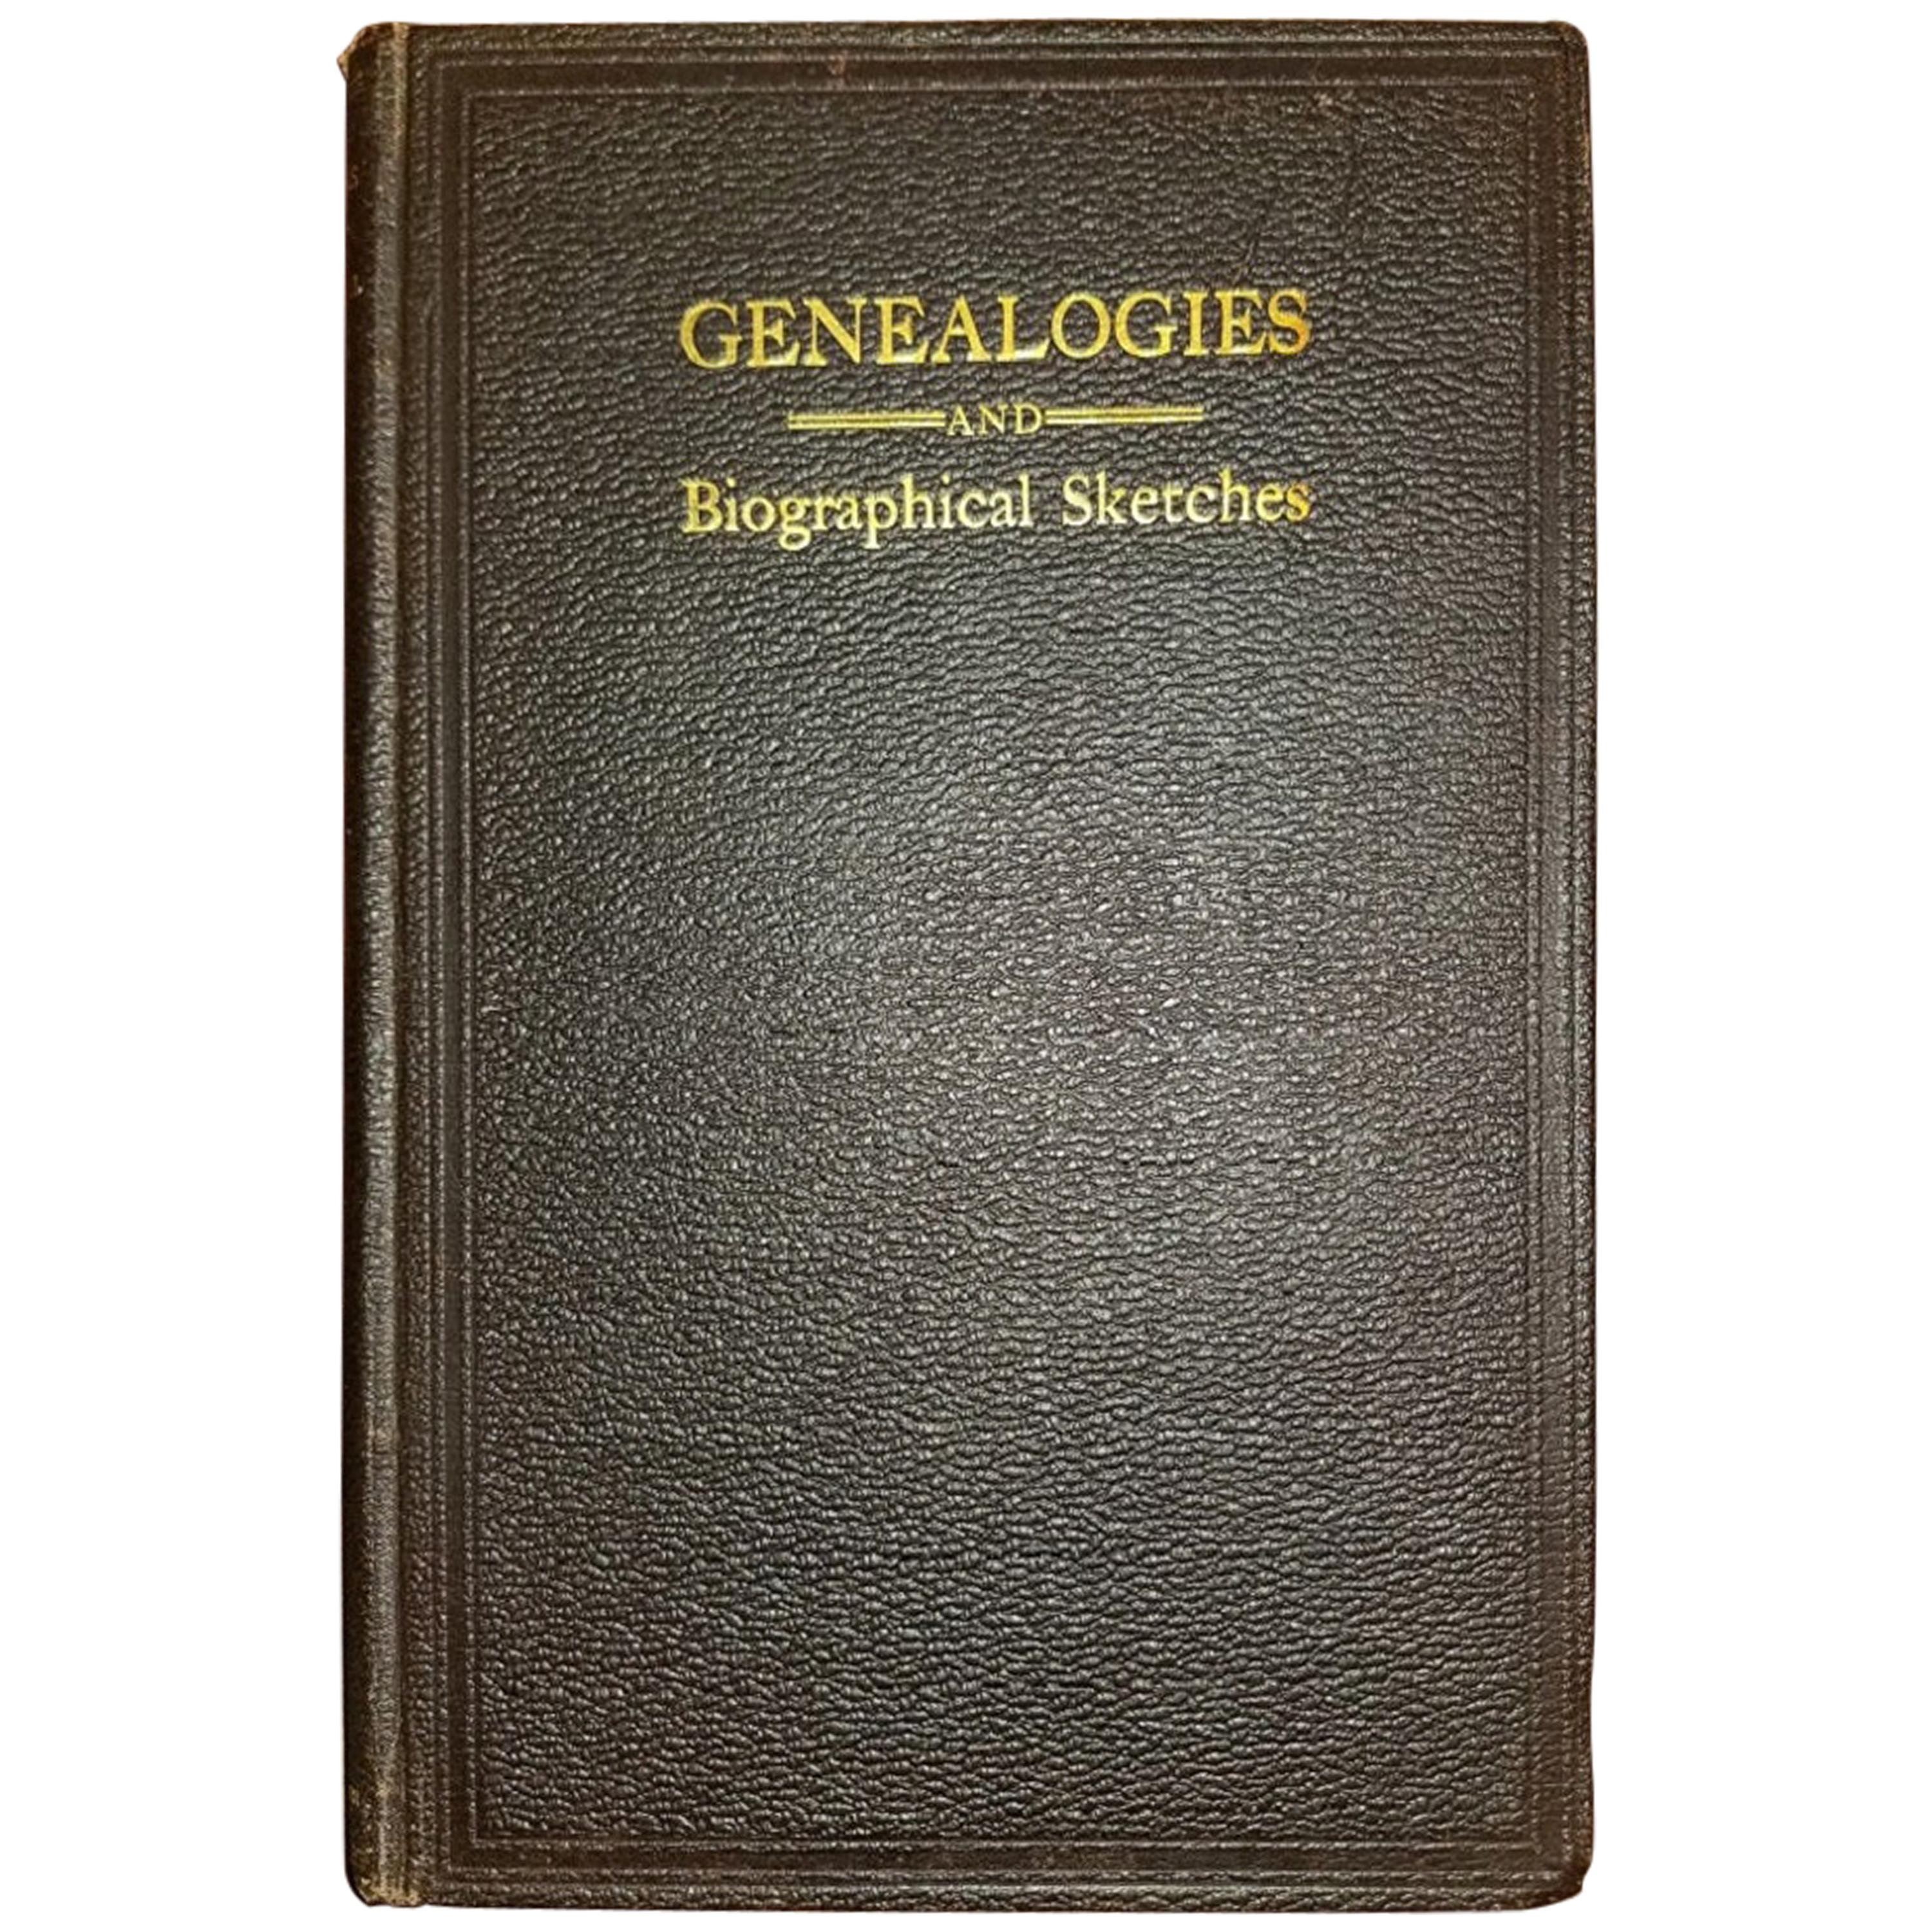 Genealogies and Sketches of Some Old Families of VA and KY by BF Van Meter 1901